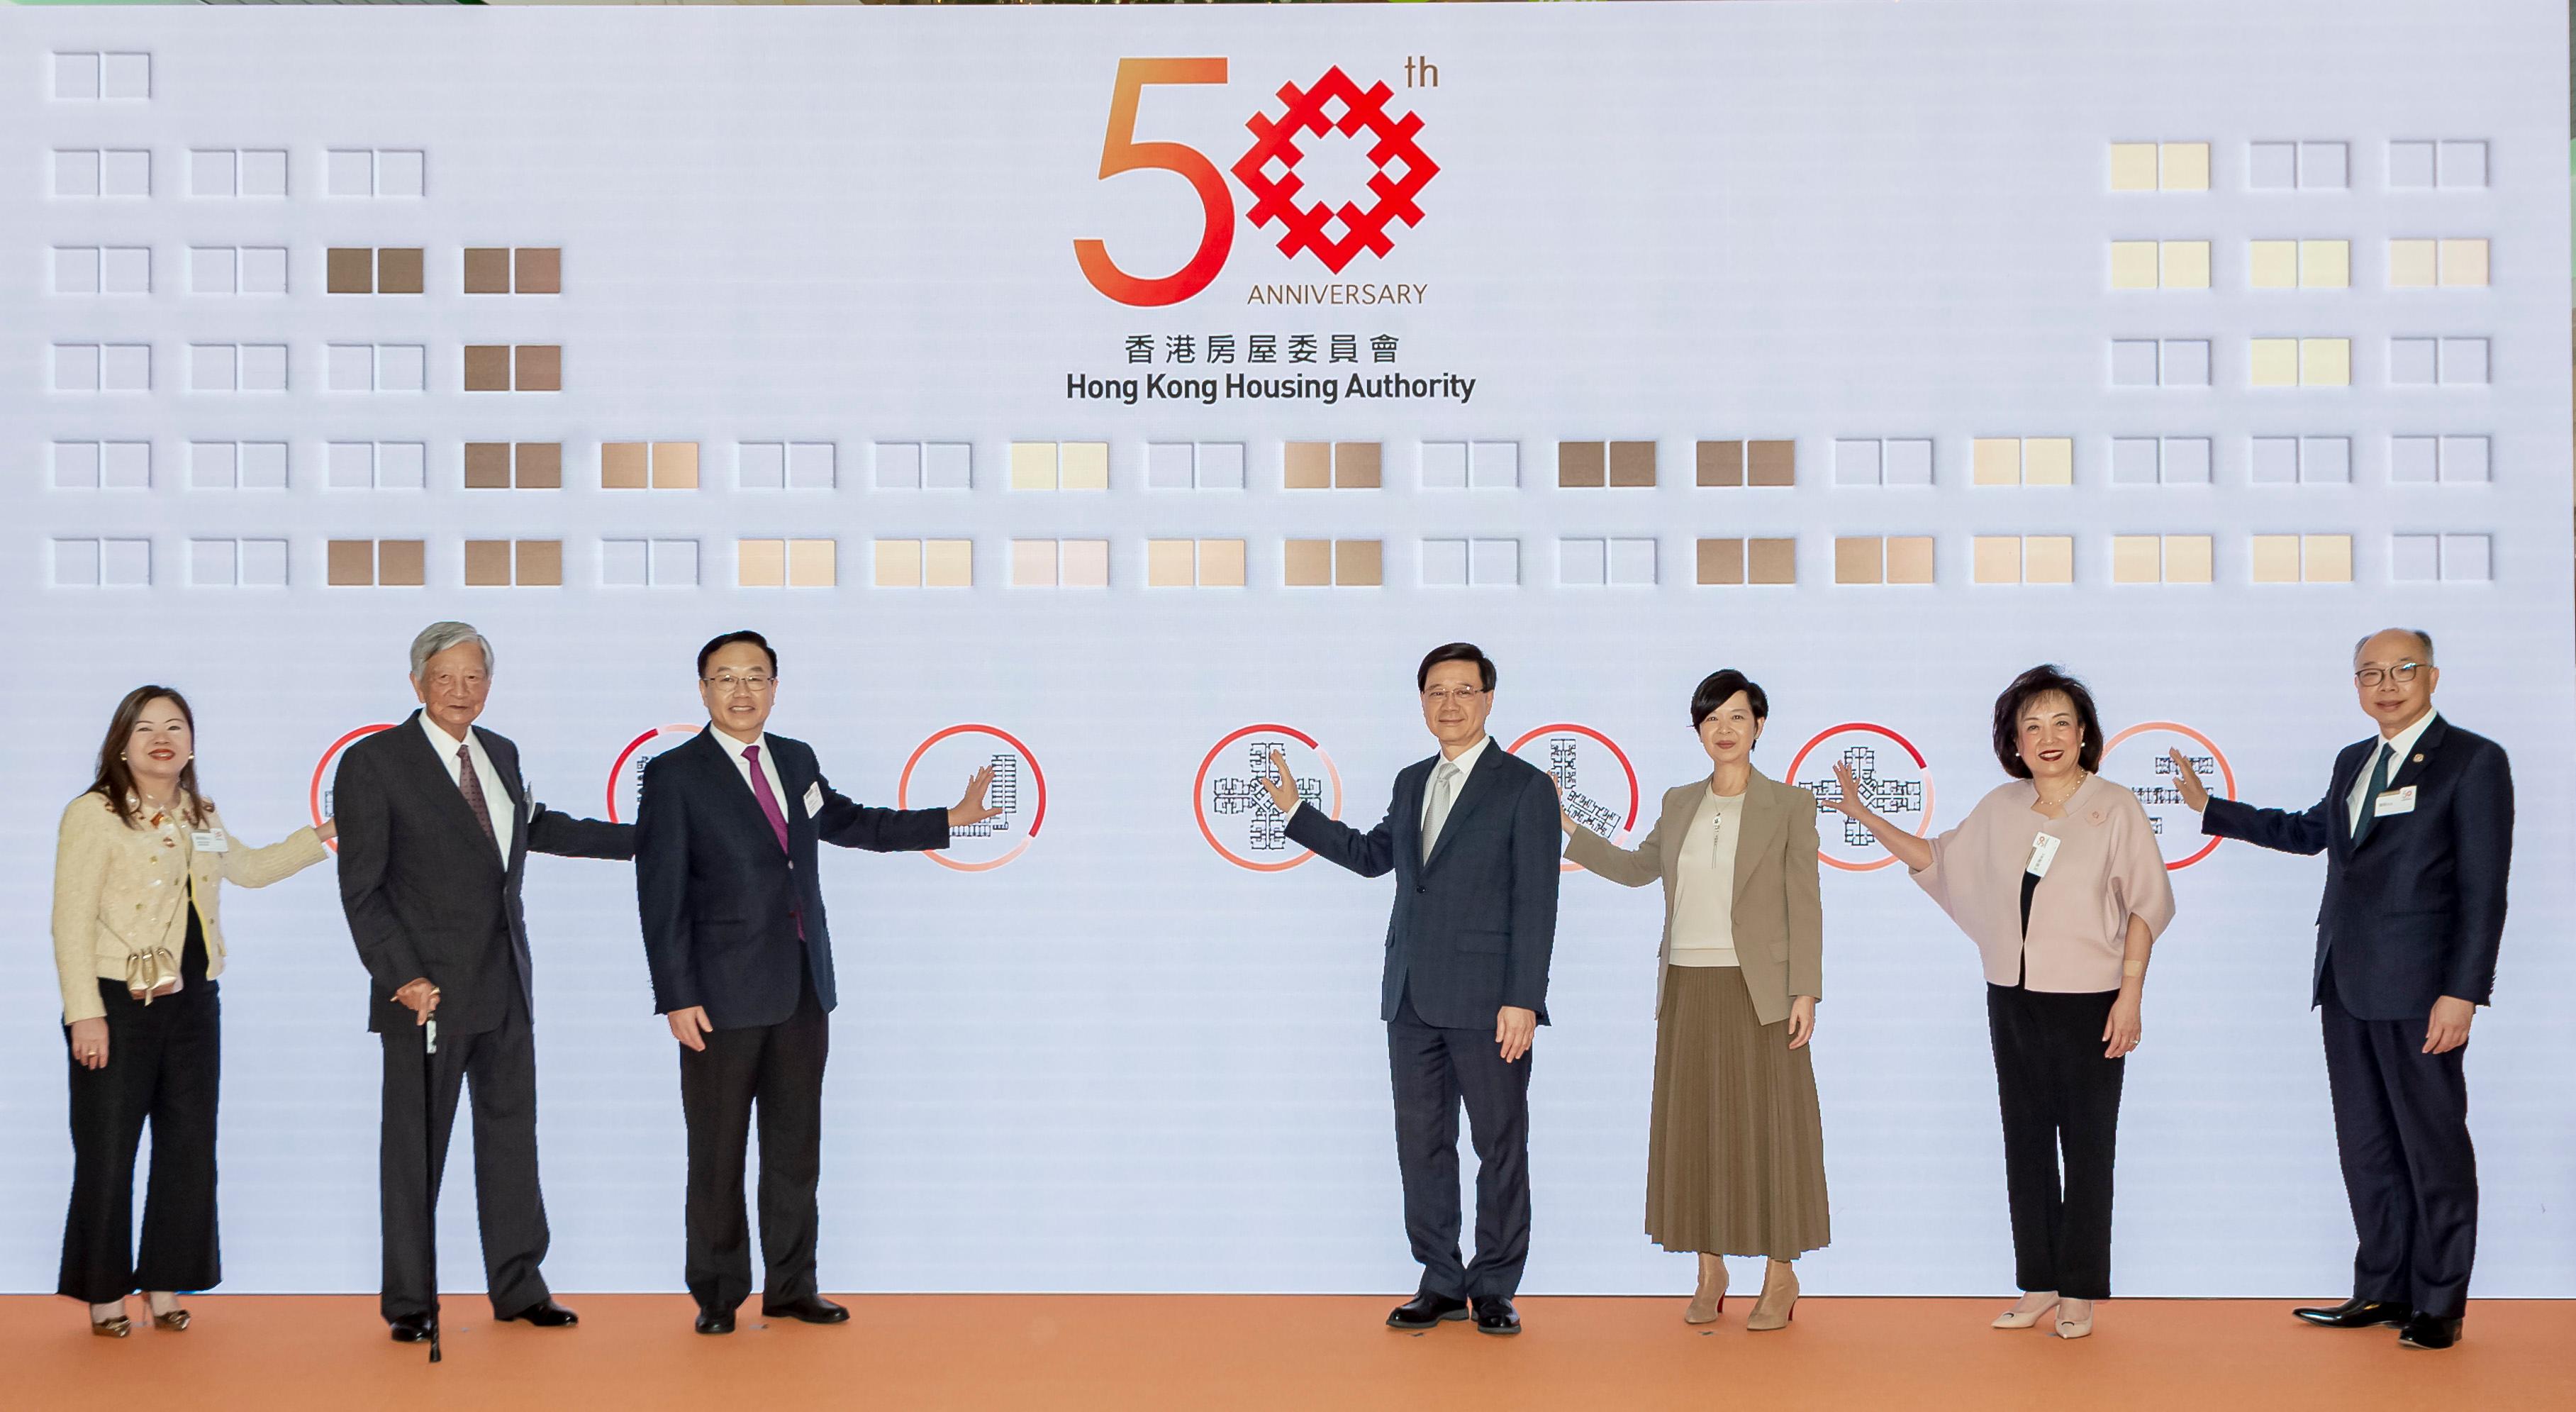 The Chief Executive, Mr John Lee, (centre); Deputy Director of the Liaison Office of the Central People's Government in the Hong Kong Special Administrative Region Mr He Jing (third left); the Secretary for Housing and Chairman of the Hong Kong Housing Authority (HA), Ms Winnie Ho (third right); former HA chairmen Dr Donald Liao (second left), Dr Rosanna Wong (second right), and Mr Frank Chan (first right); and the Permanent Secretary for Housing, Miss Rosanna Law (first left), officiated at the HA's 50th anniversary celebration ceremony today (December 12).